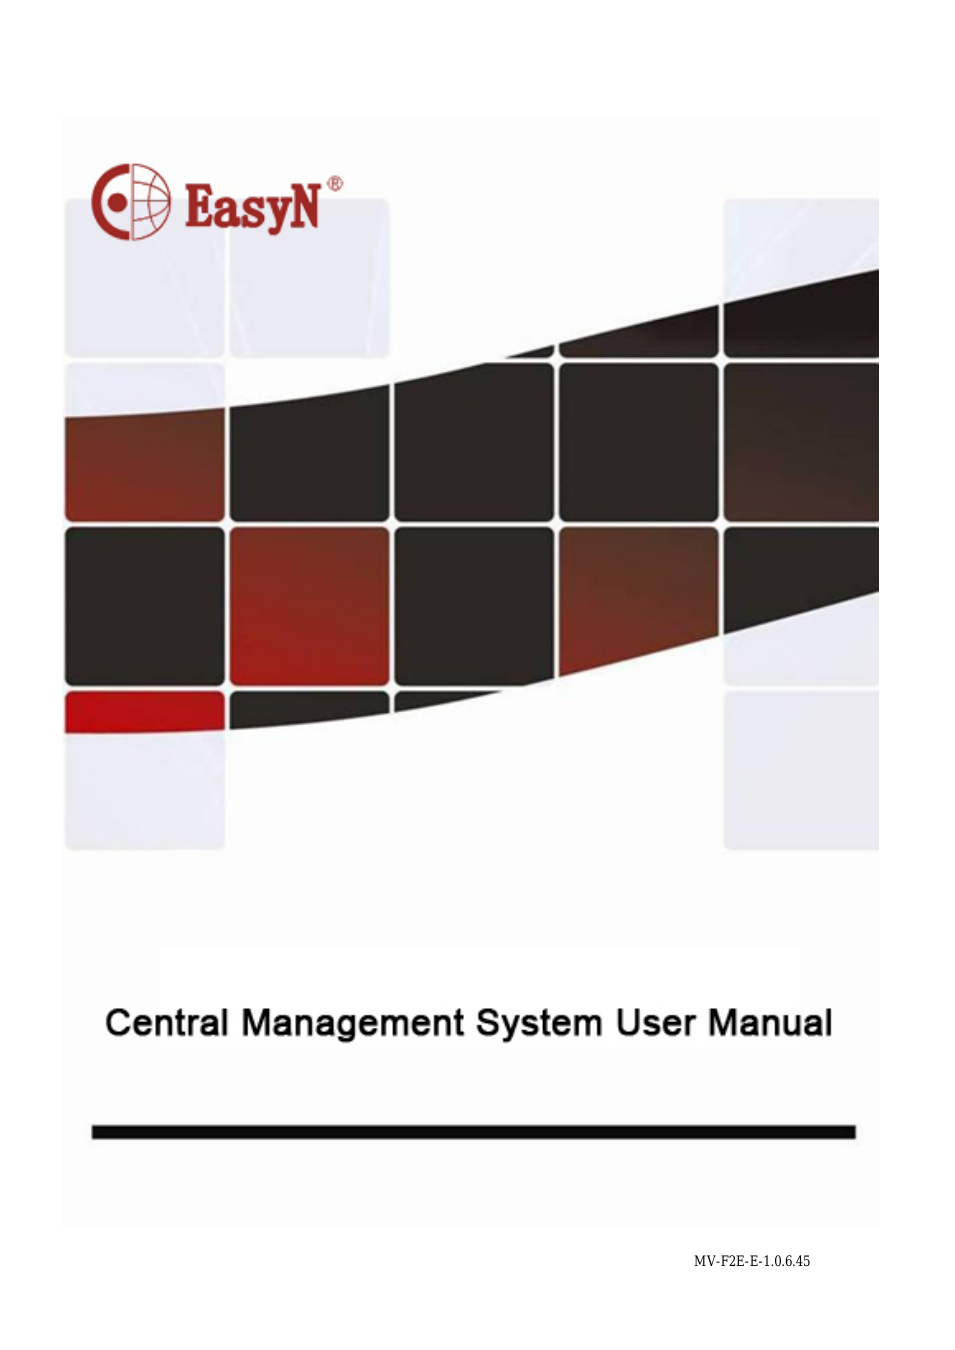 F2 Series Central Management System